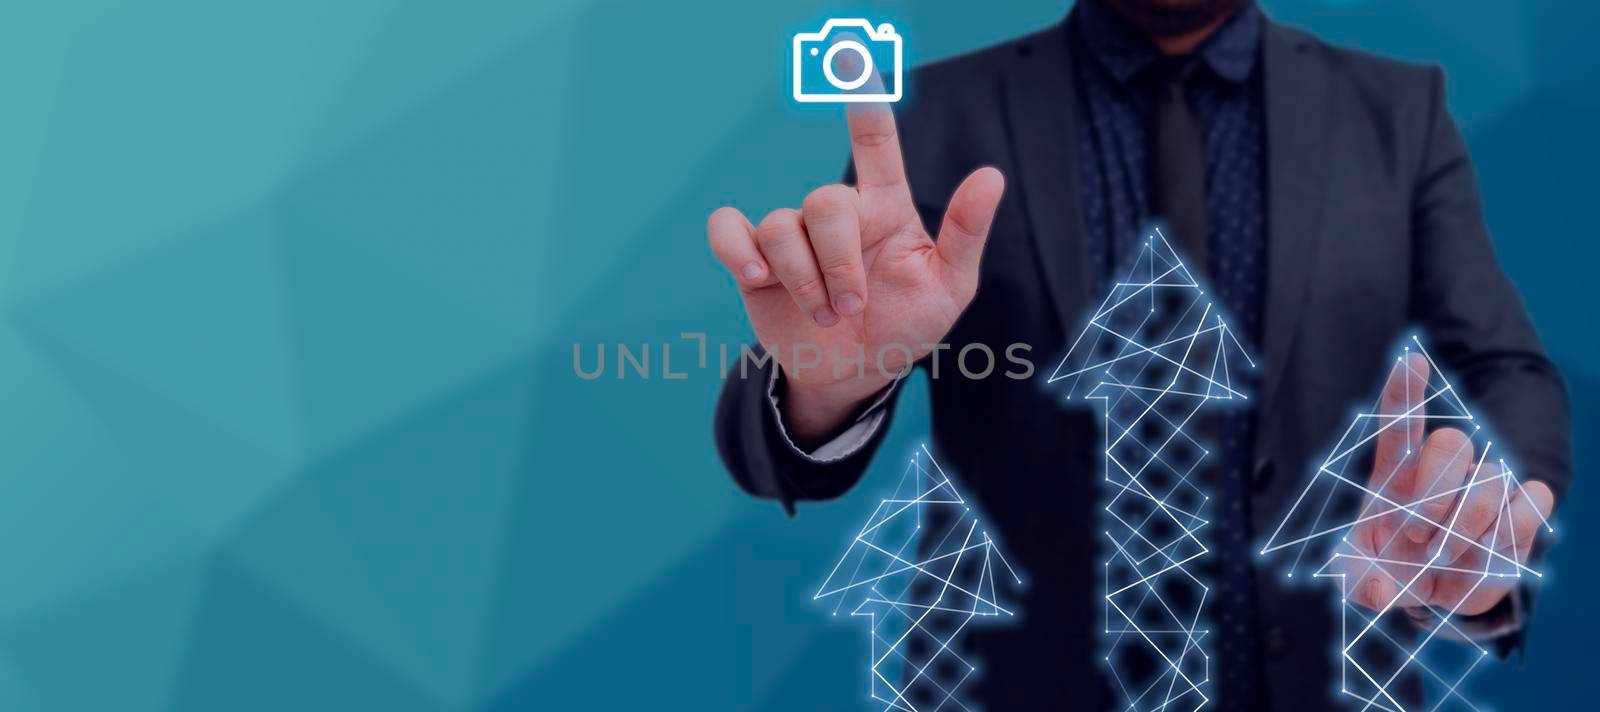 Businessman Pointing With His Hands On Arrows Going Up And A Snapshot Digital With A Futuristic Design. Man In Suit Pressing On Symbols And Presenting Crucial Ideas. by nialowwa